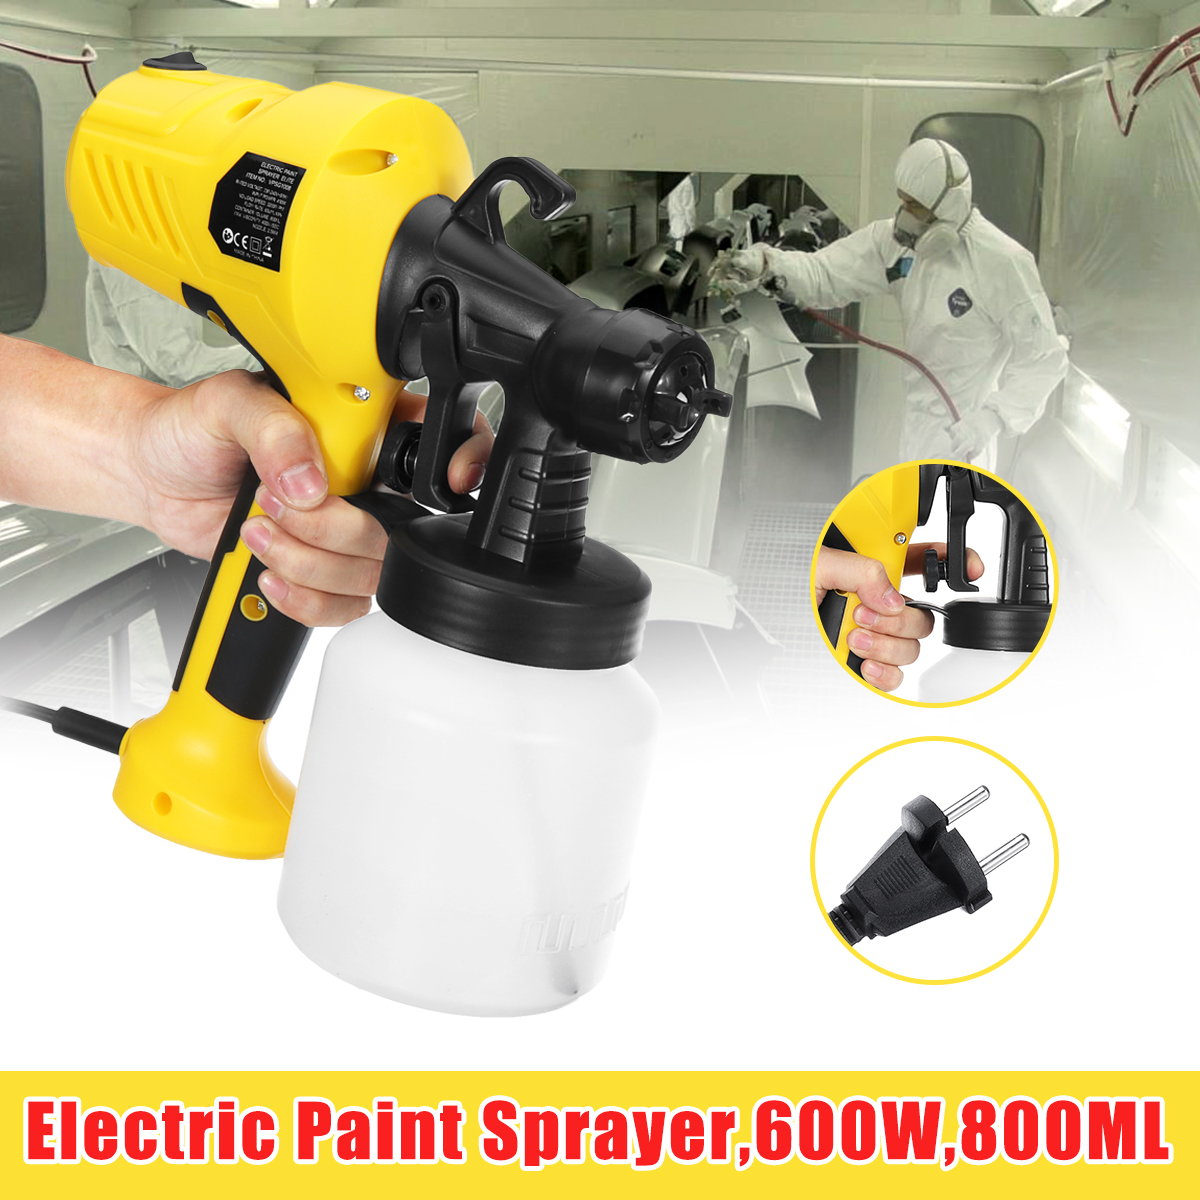 600W Electric Spray Paint Sprayer For Cars Wood Furniture Wall Woodworking 22